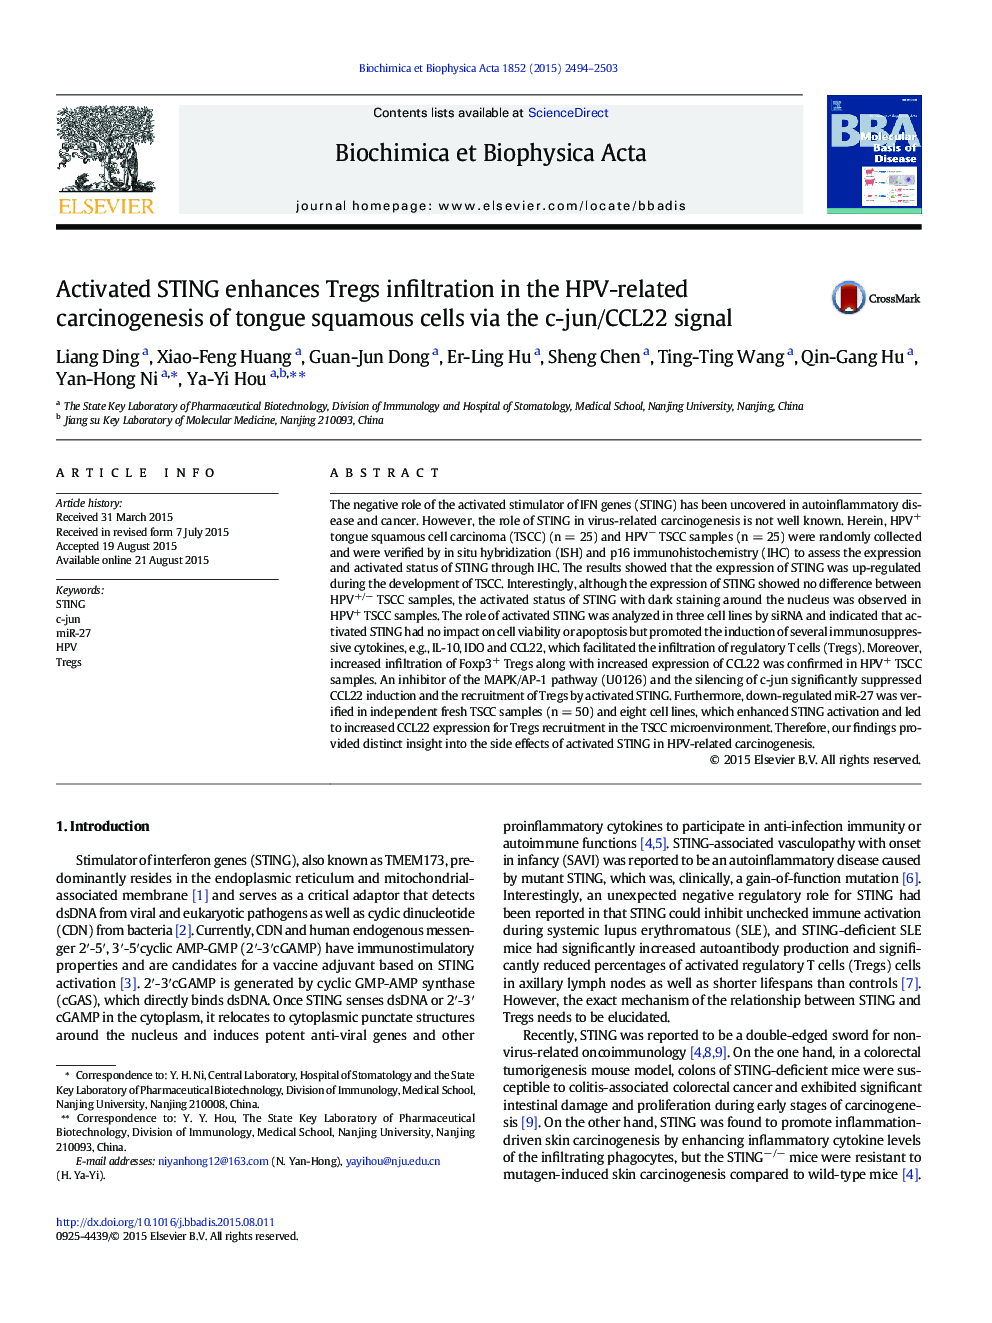 Activated STING enhances Tregs infiltration in the HPV-related carcinogenesis of tongue squamous cells via the c-jun/CCL22 signal